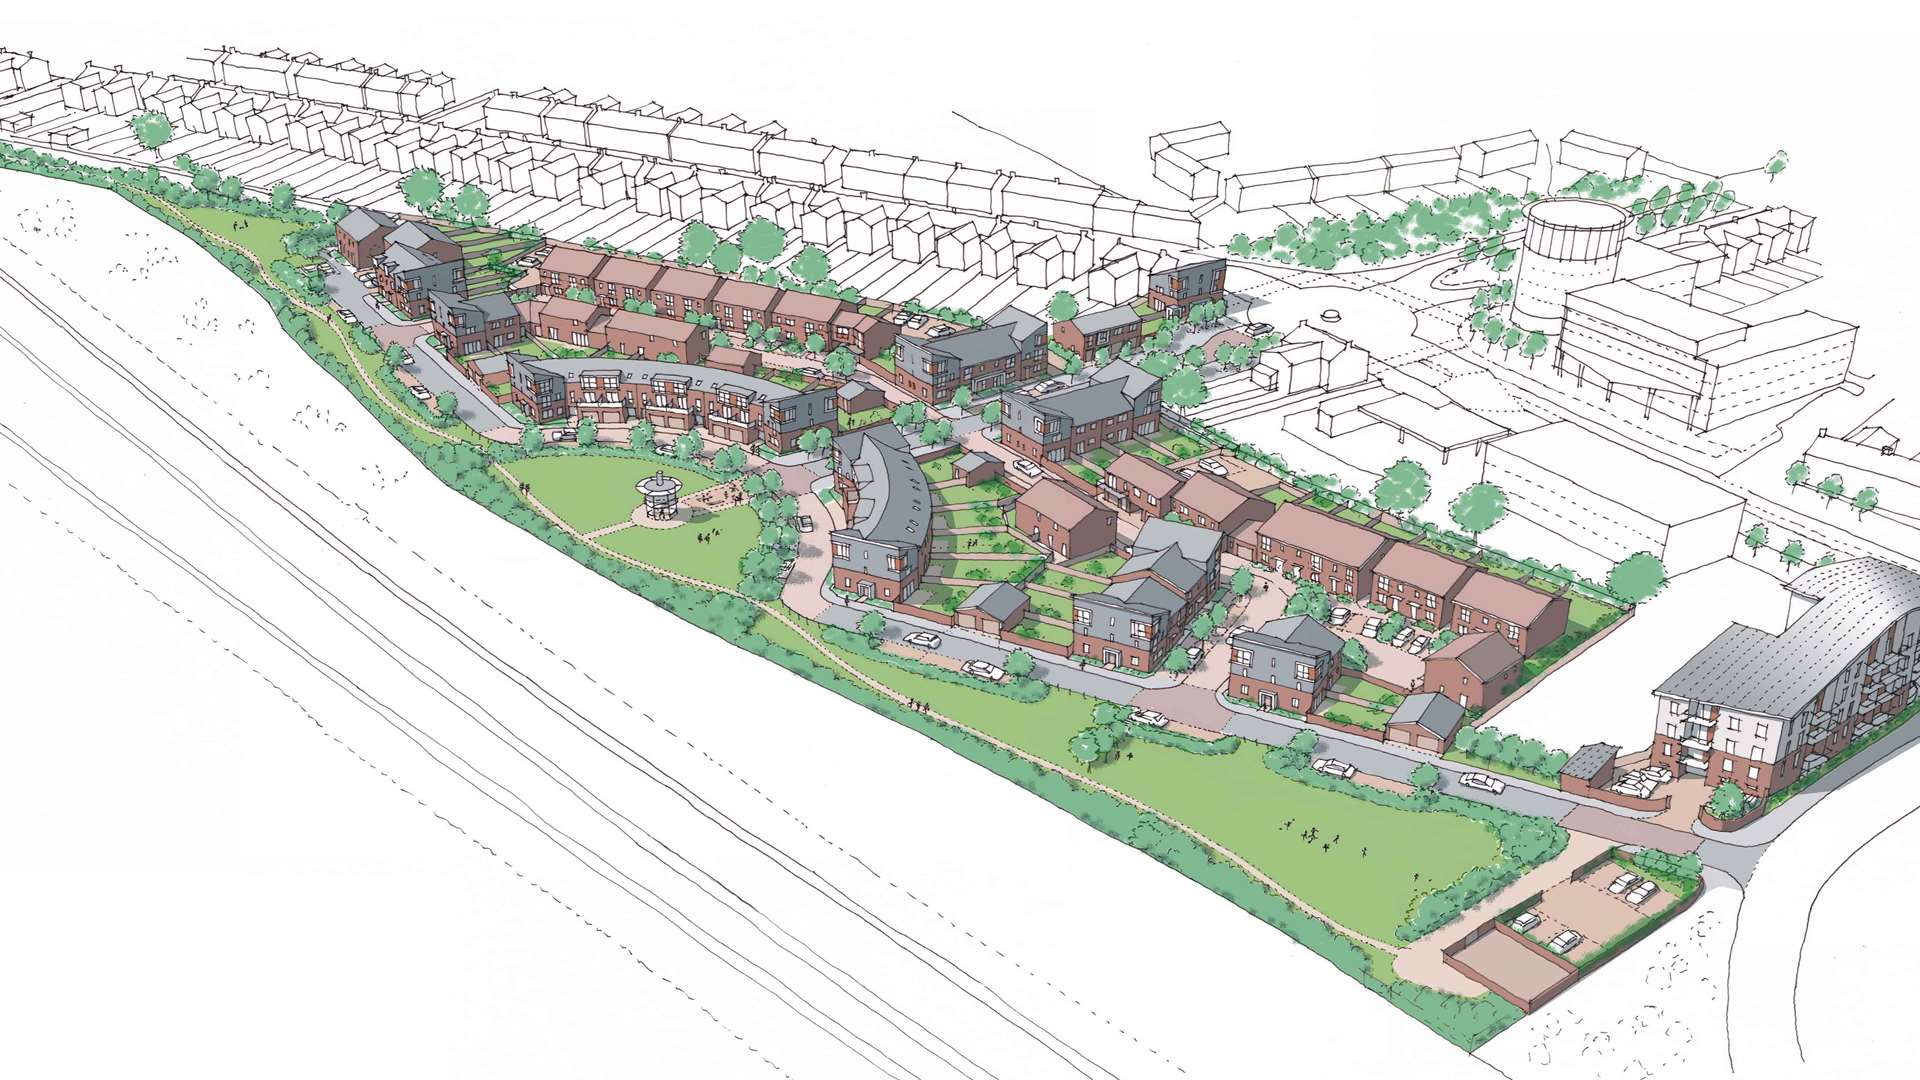 If approved, the development will create 83 new town centre homes